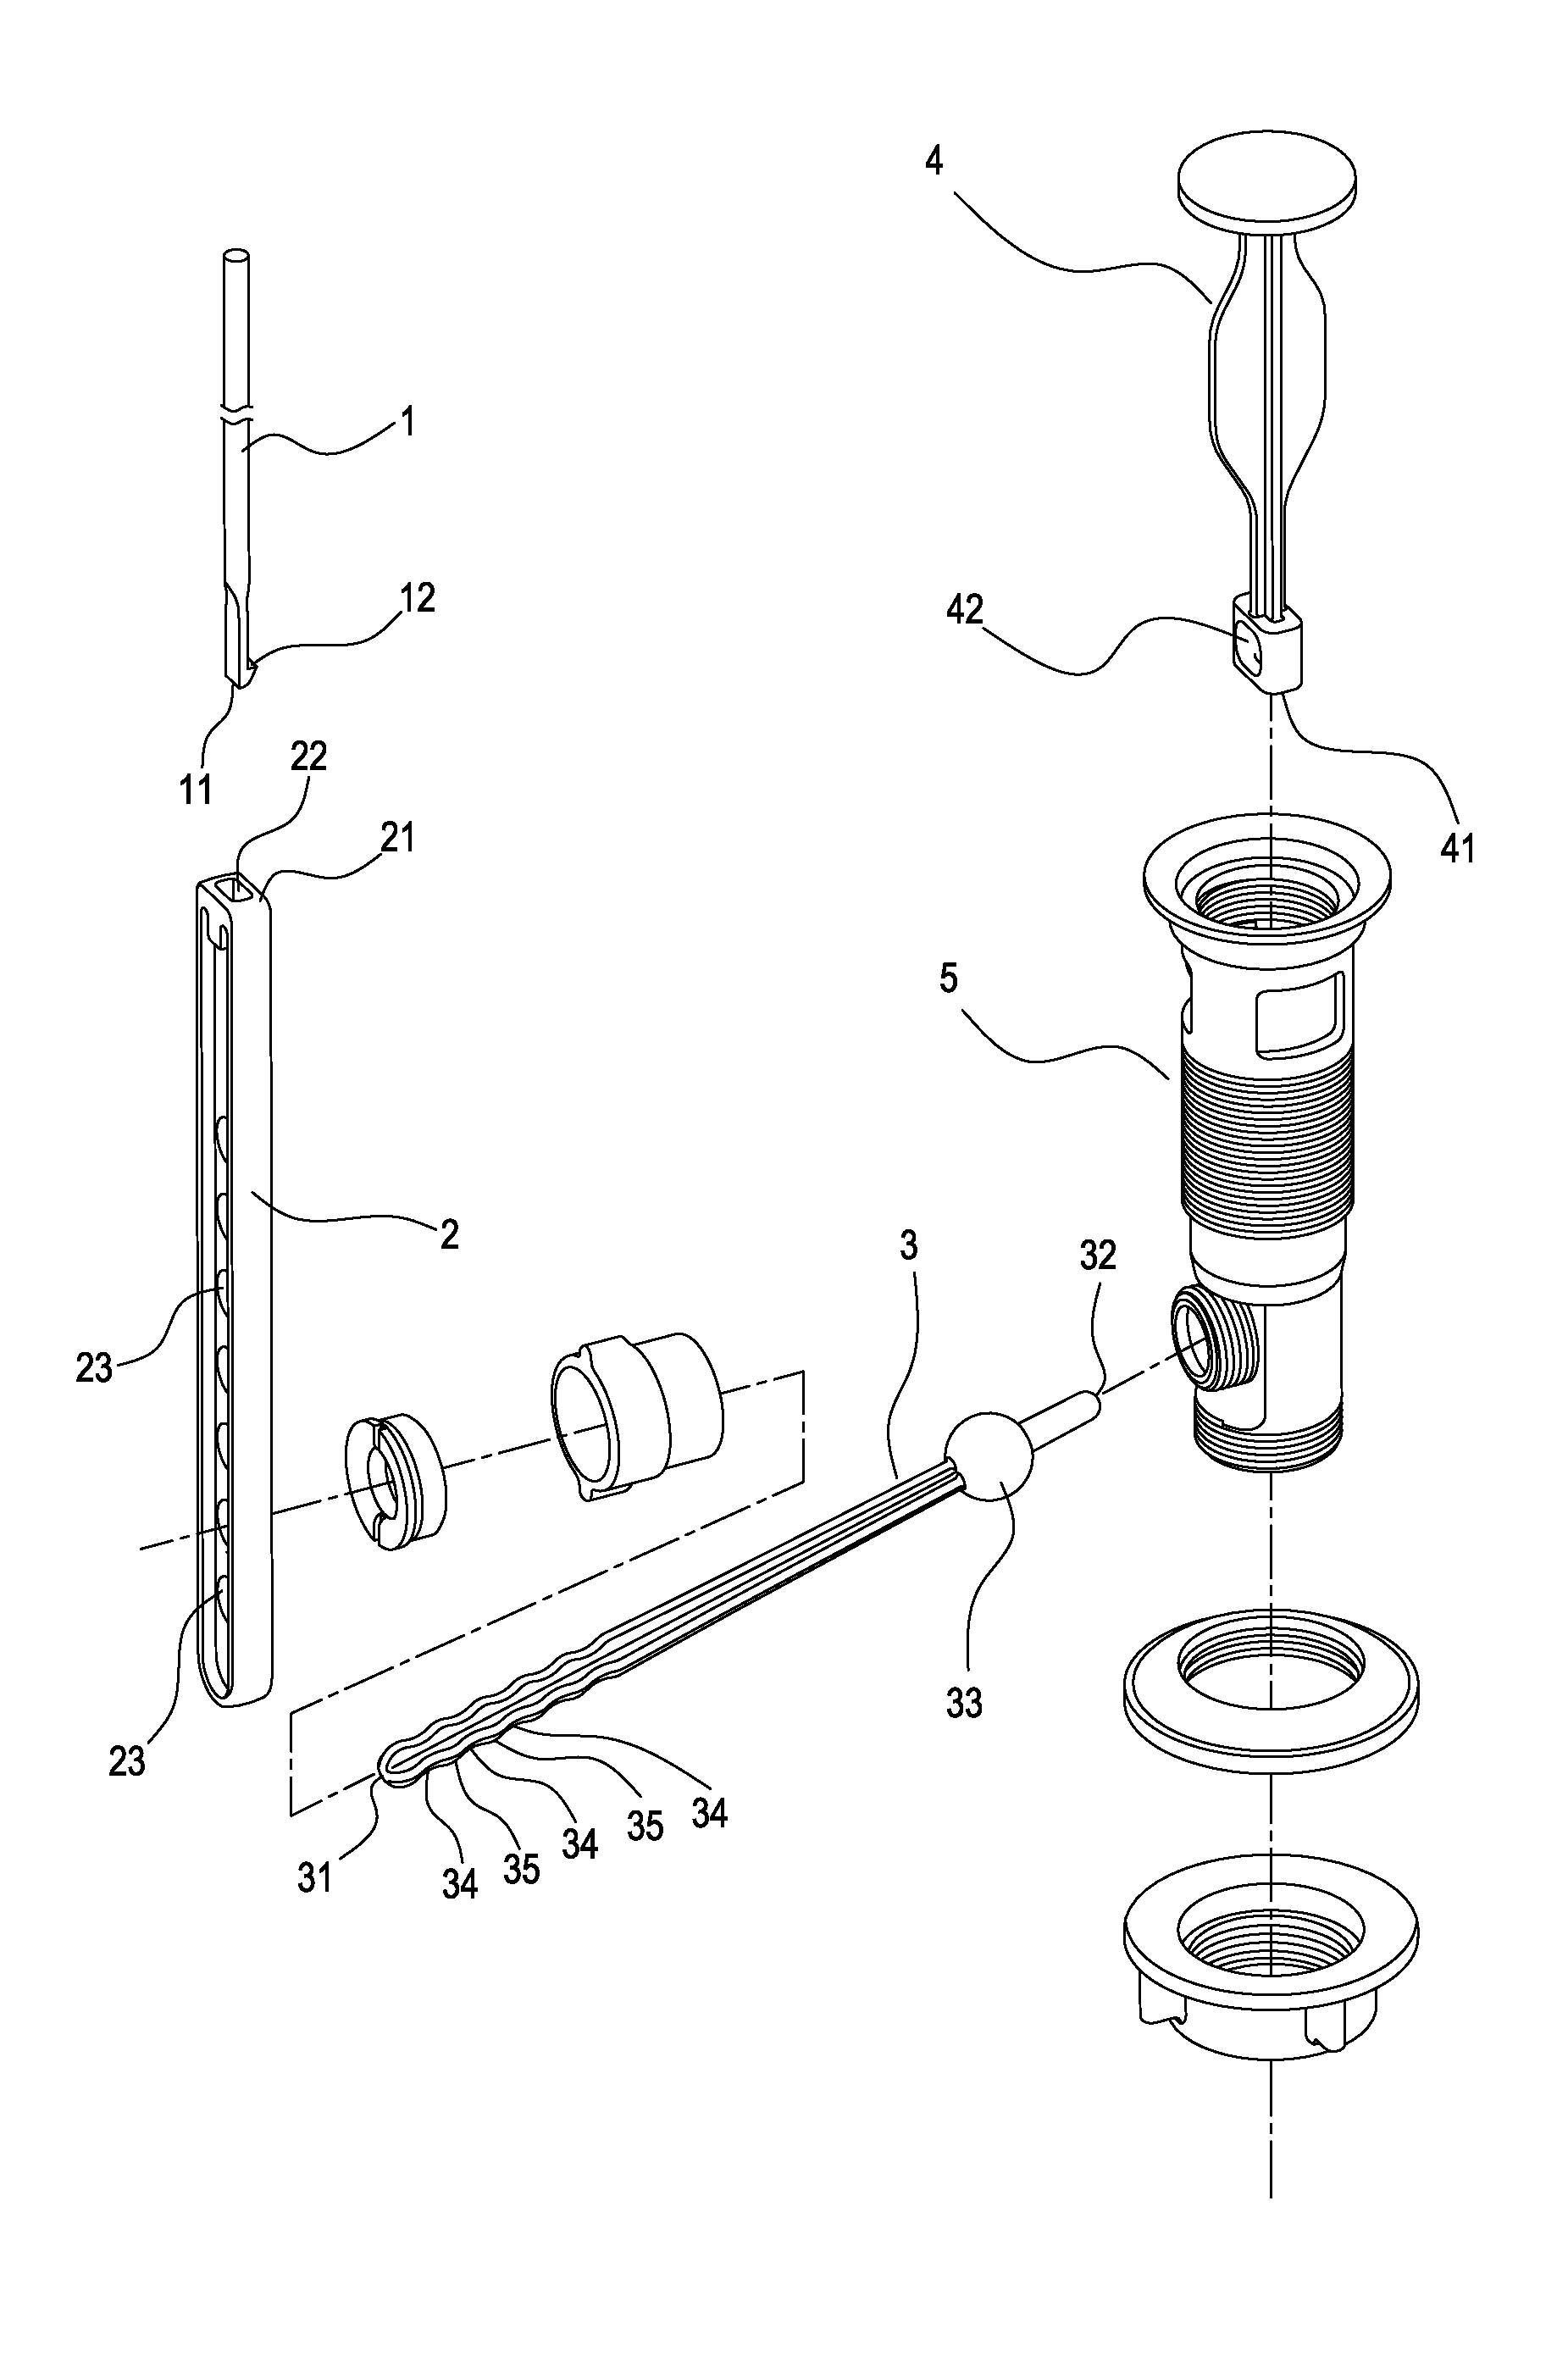 Pop-up drain stopper linkage assembly